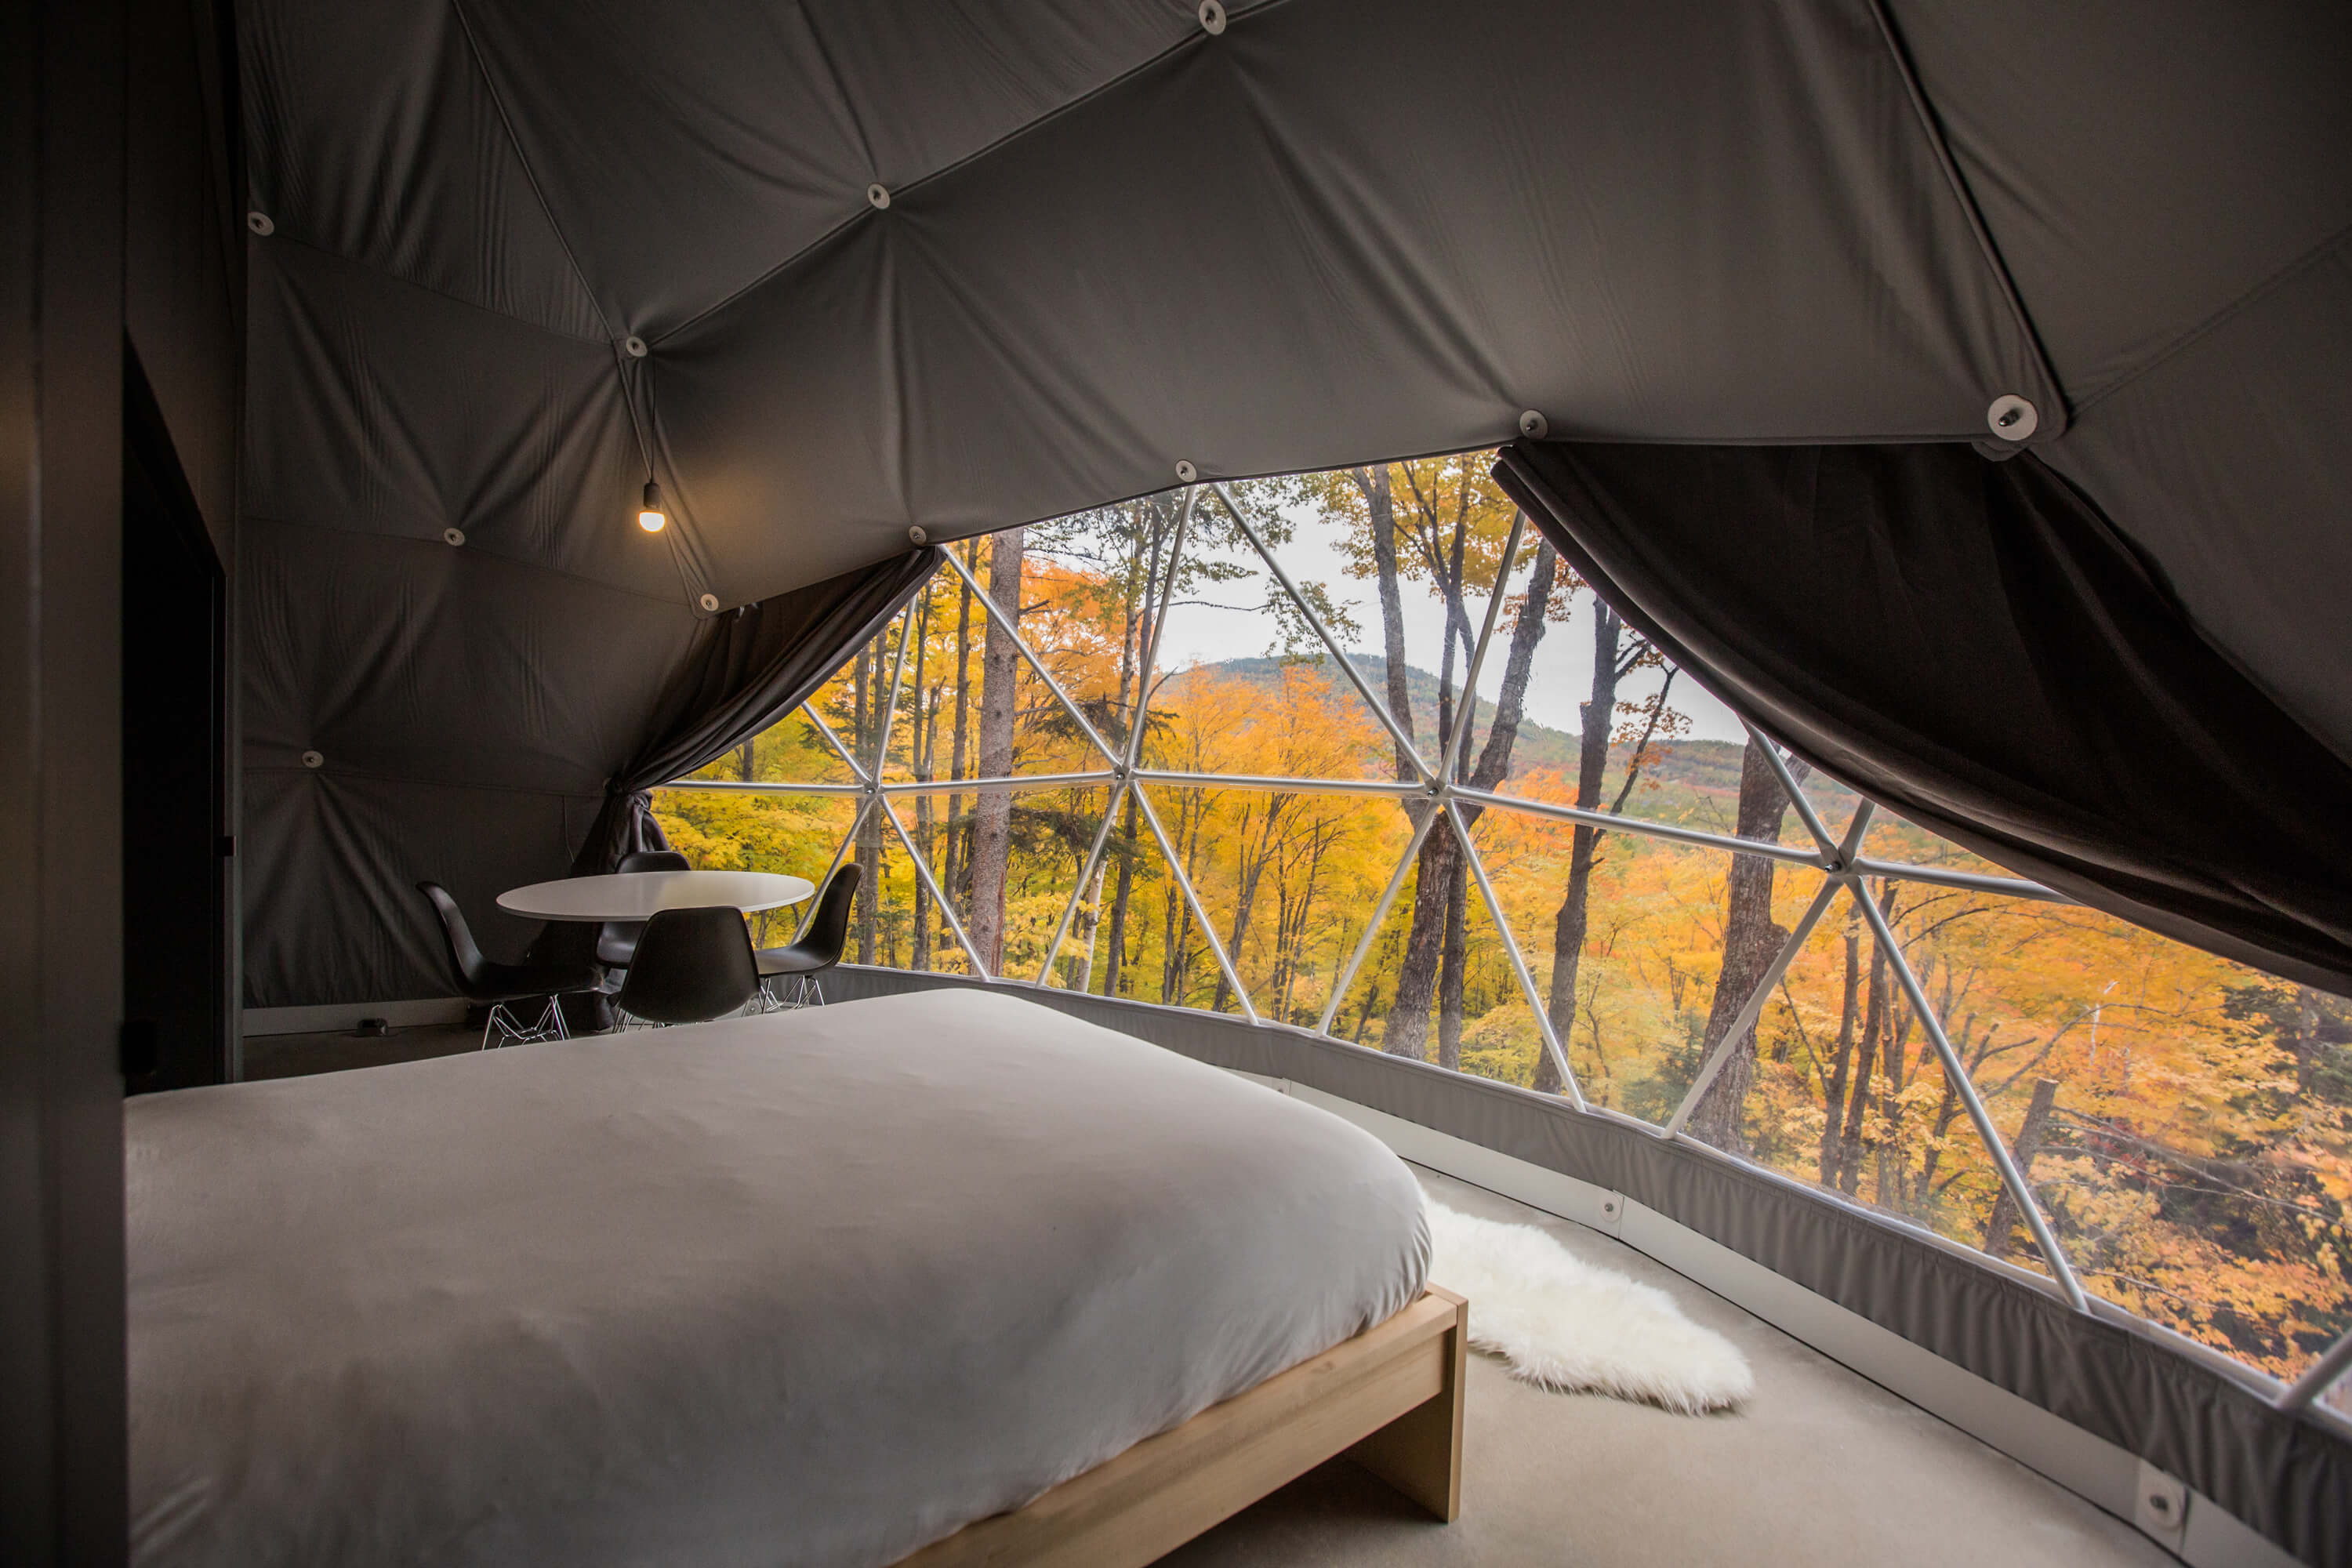 Dômes de Charlevoix – Glamping Domes in Quebec Forest